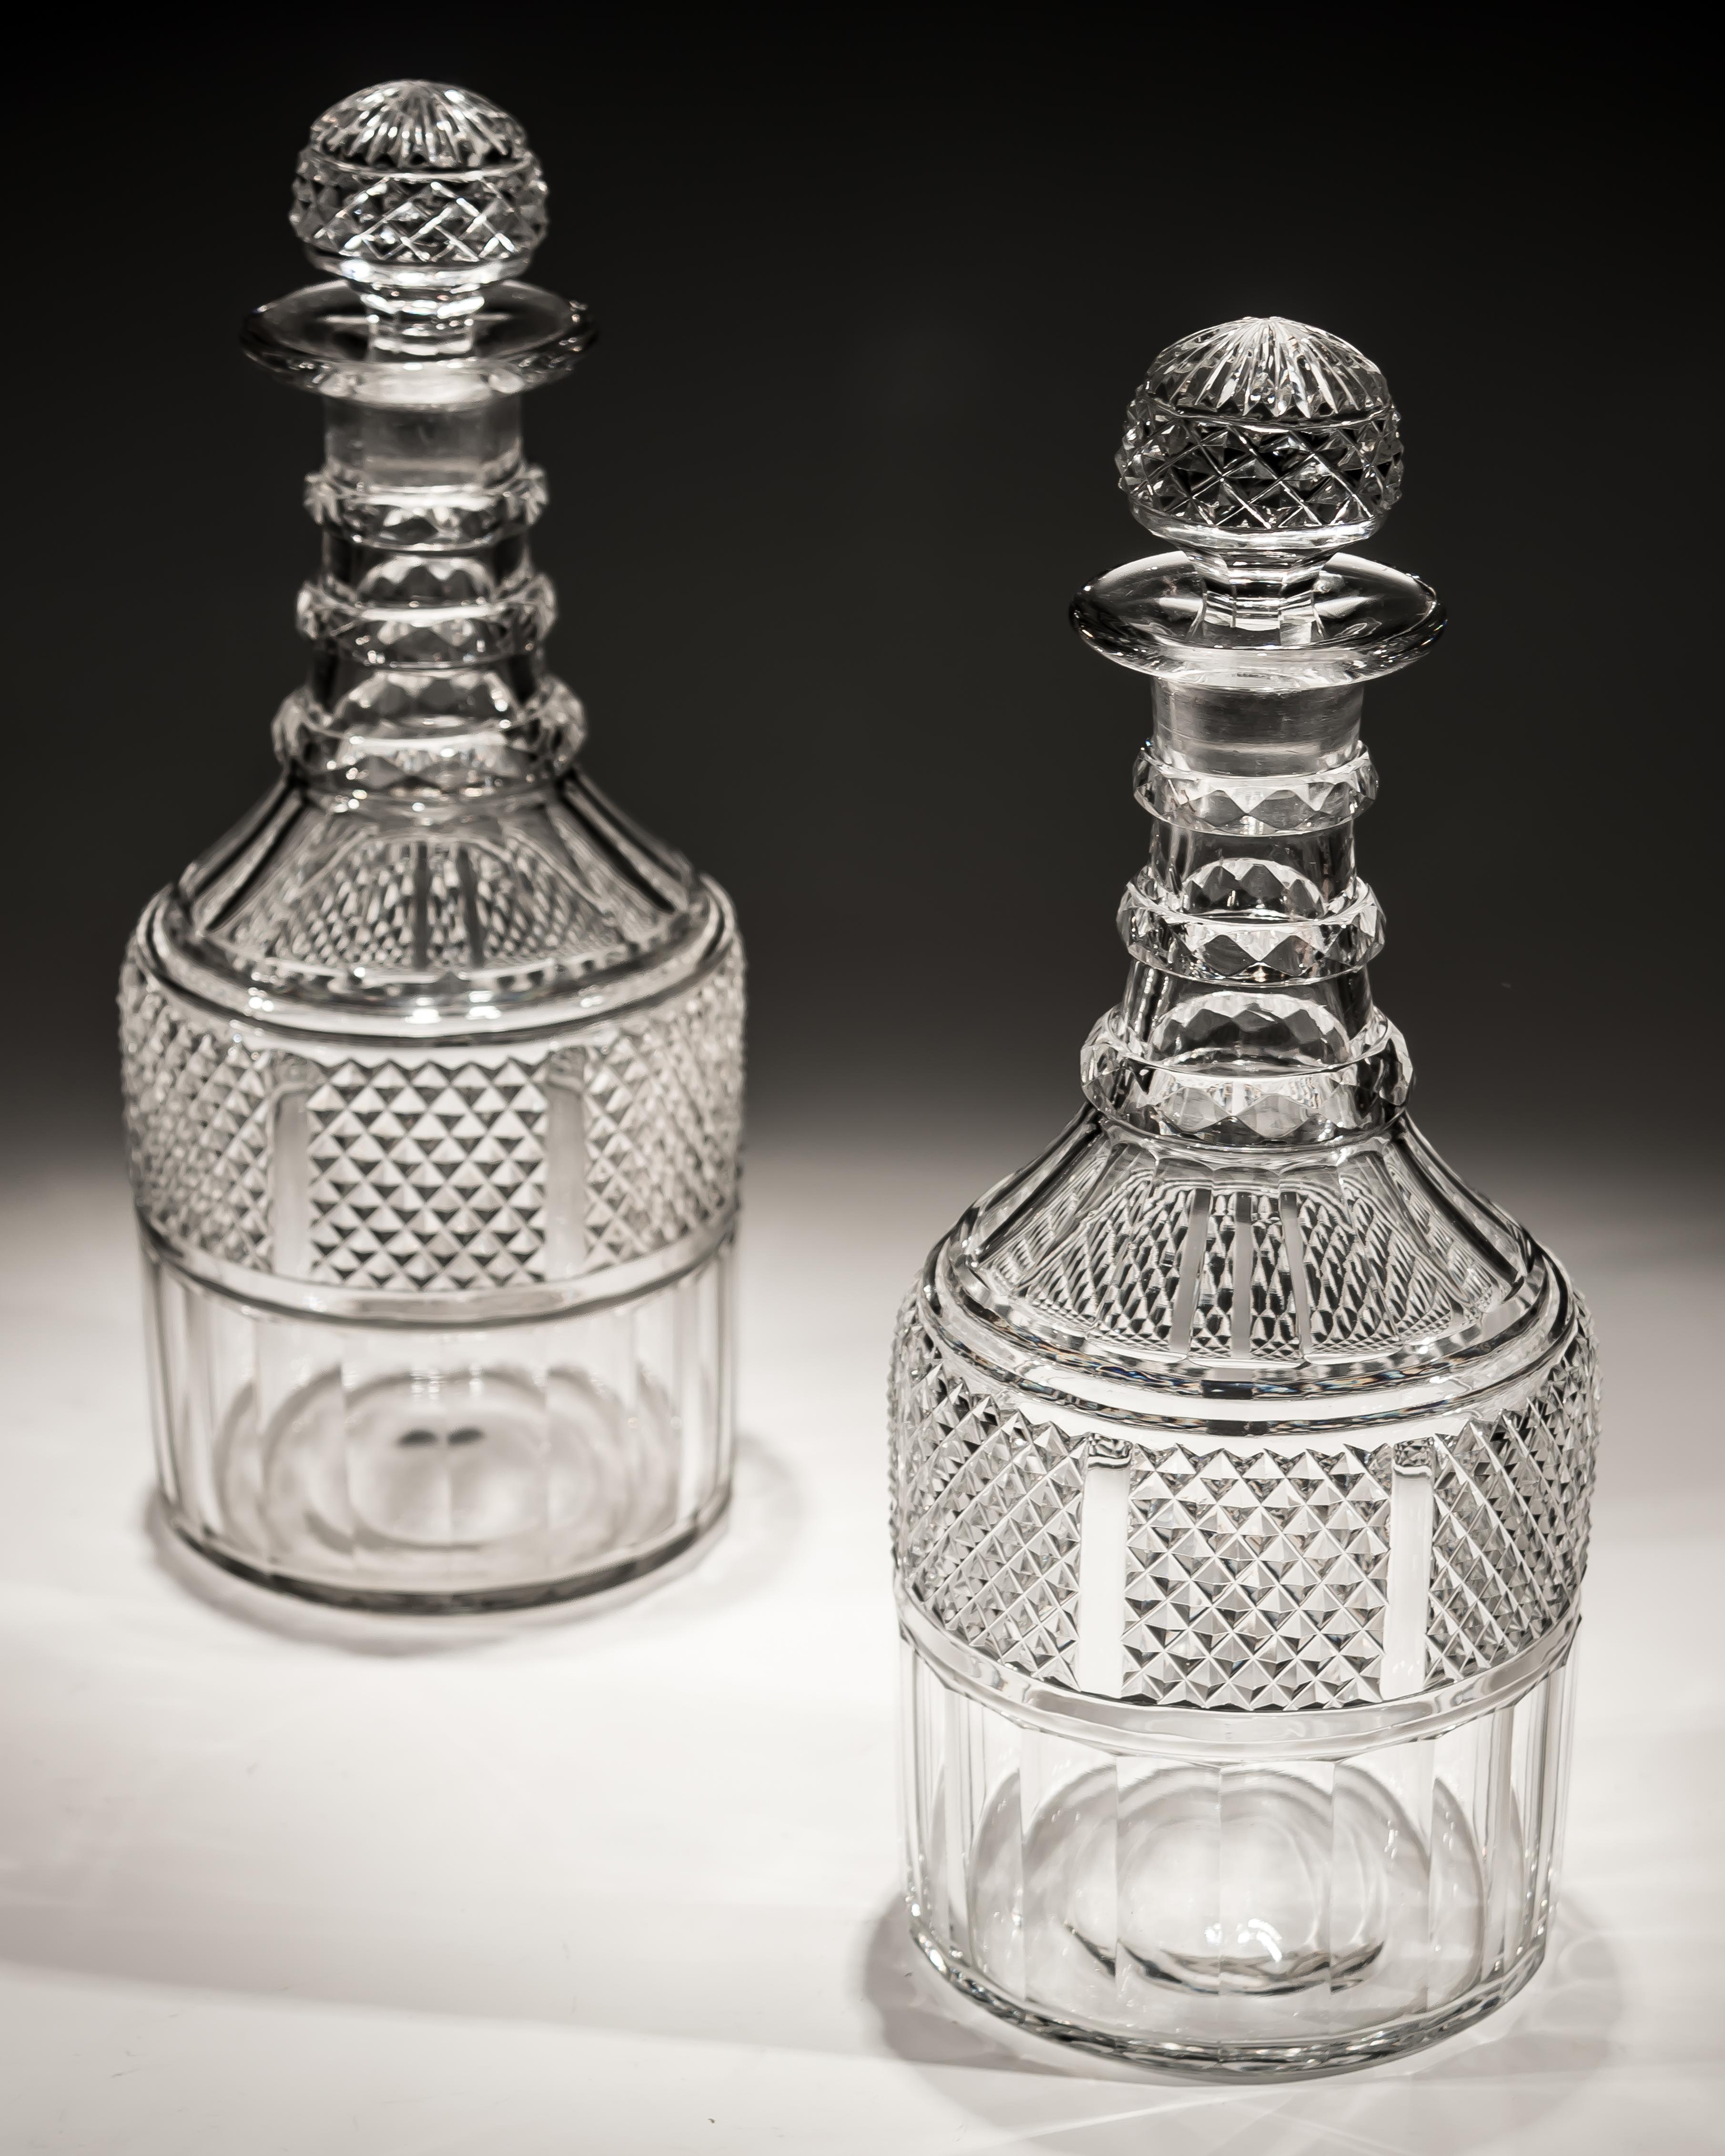 A fine pair of slice and diamond cut Regency decanters.